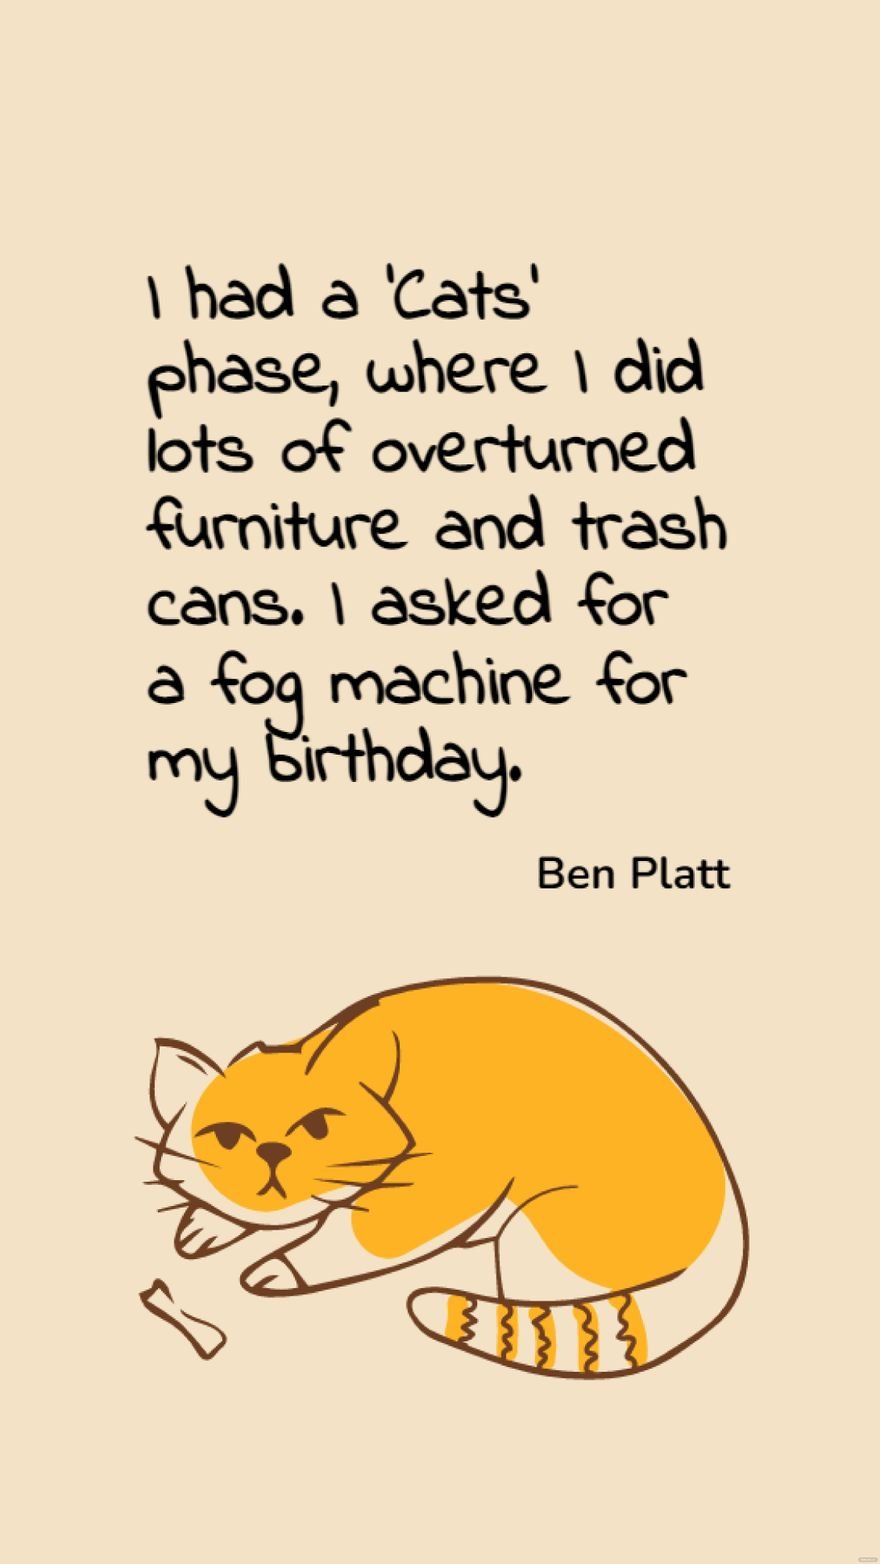 Free Ben Platt - I had a 'Cats' phase, where I did lots of overturned furniture and trash cans. I asked for a fog machine for my birthday. in JPG